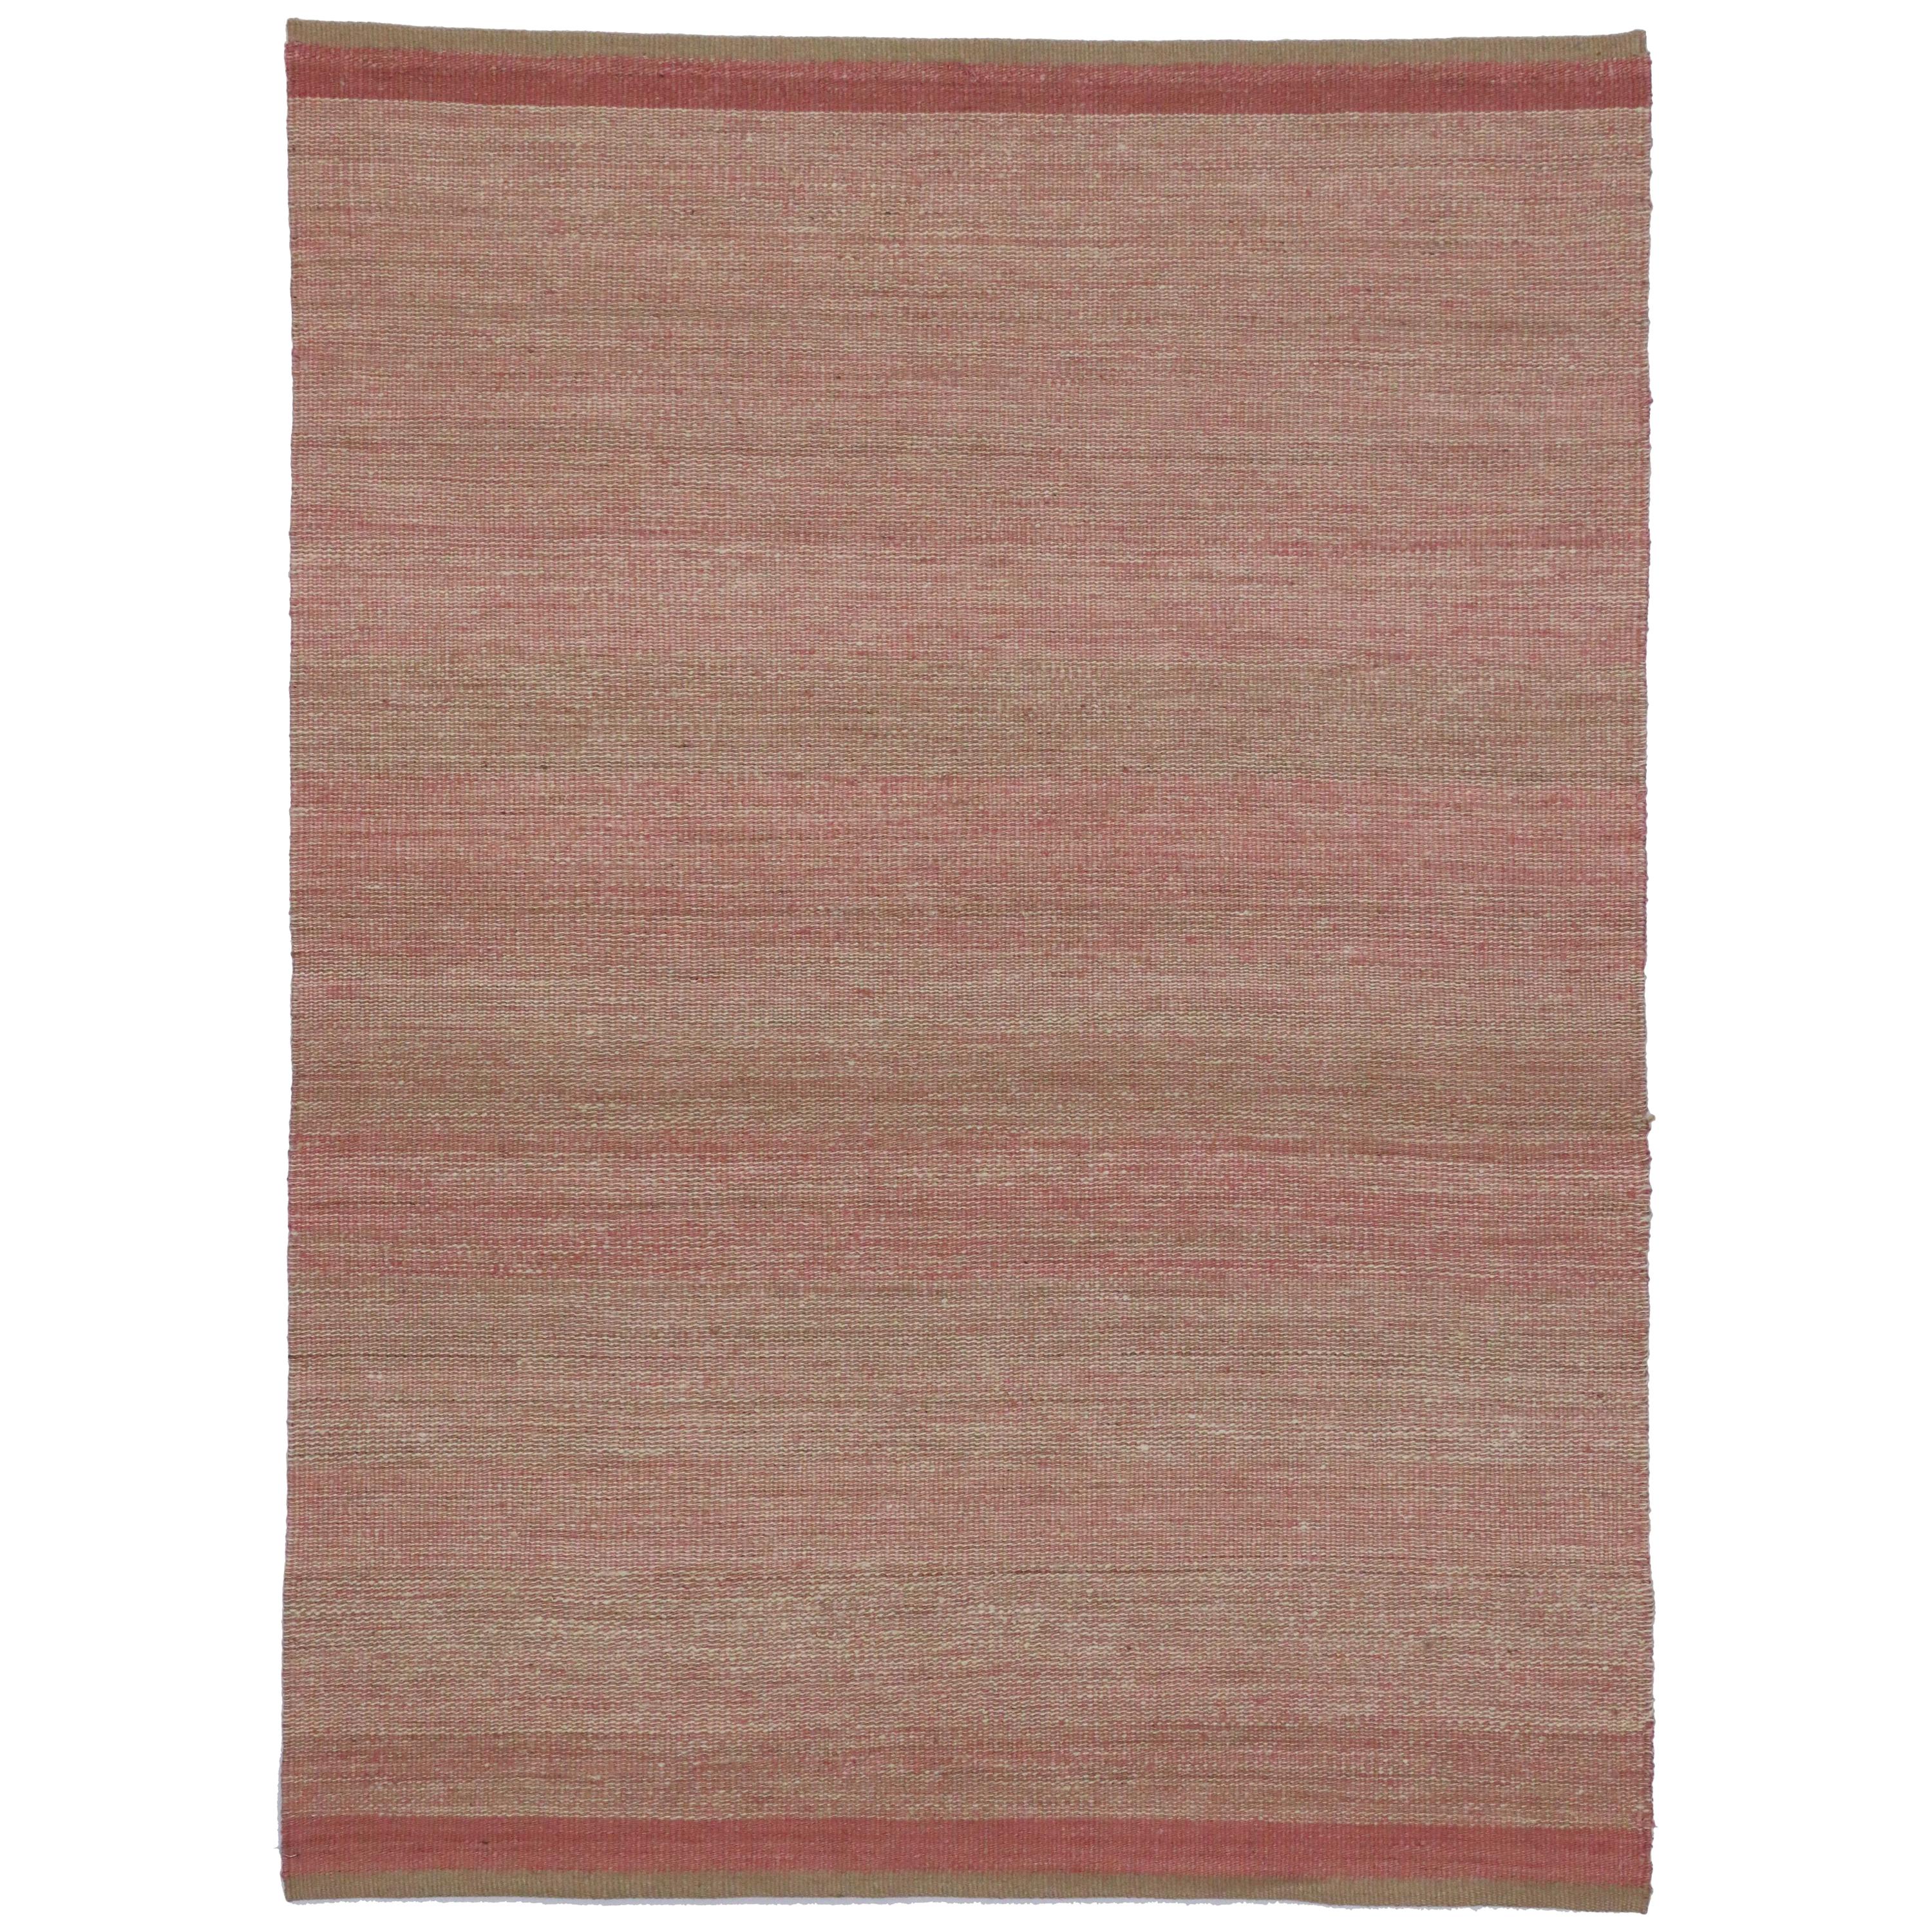 New Transitional Dhurrie Pink Kilim Rug with Romantic Coastal Cottage Style